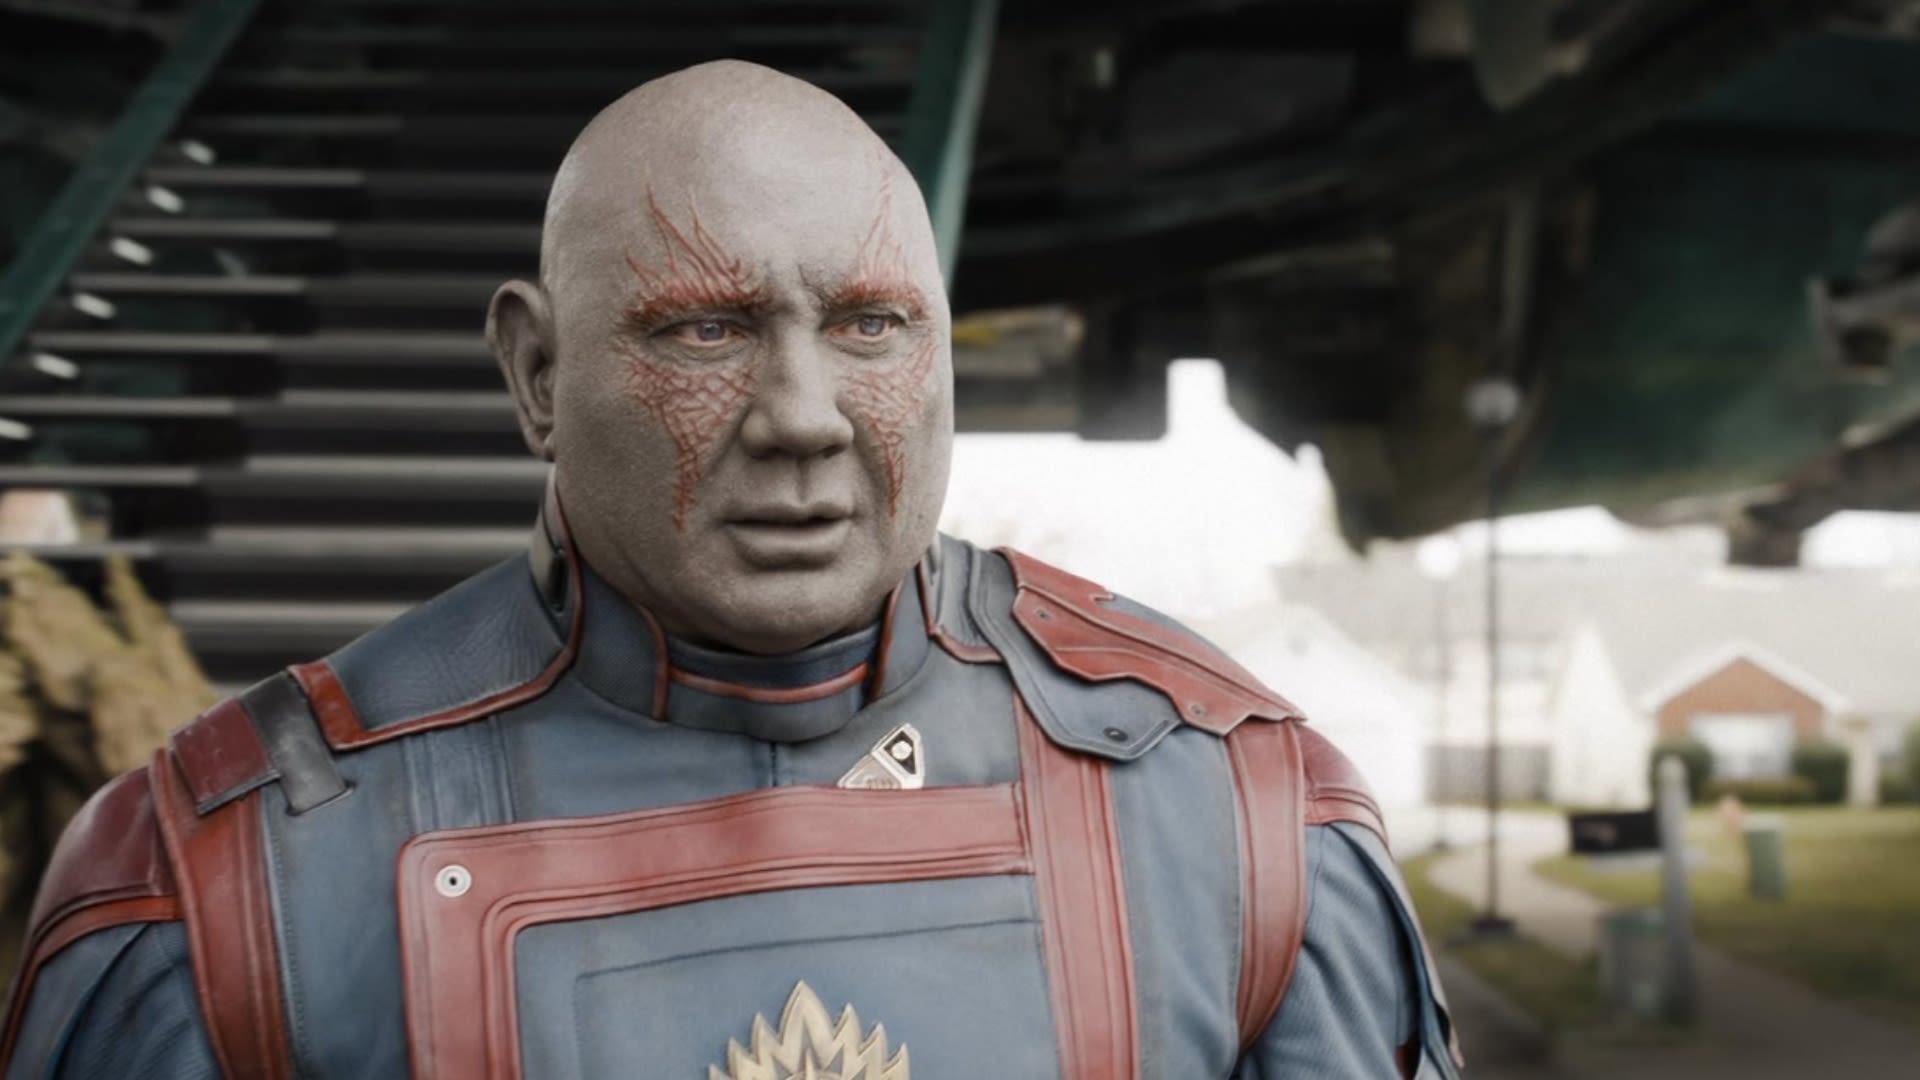 Dave Bautista is "up for anything" in James Gunn's DCU, but there was one role he became "obsessed" with